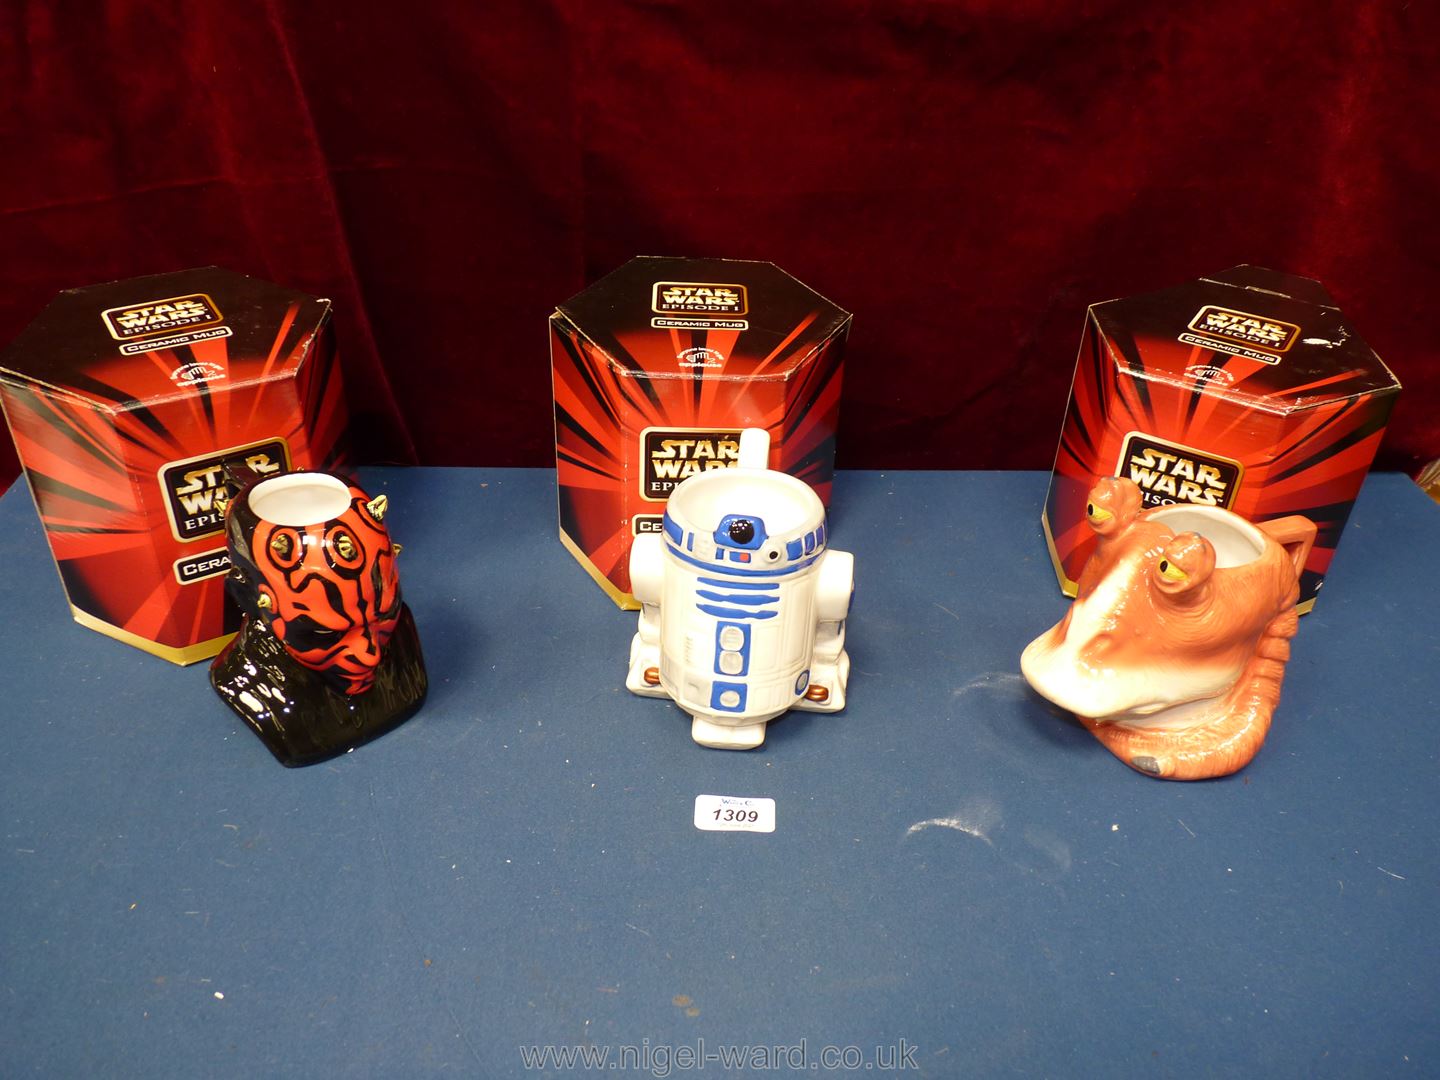 Three boxed ceramic mugs of Star Wars Episode 1 and characters Zargar Bing, R2-D2 and Darth Maul.